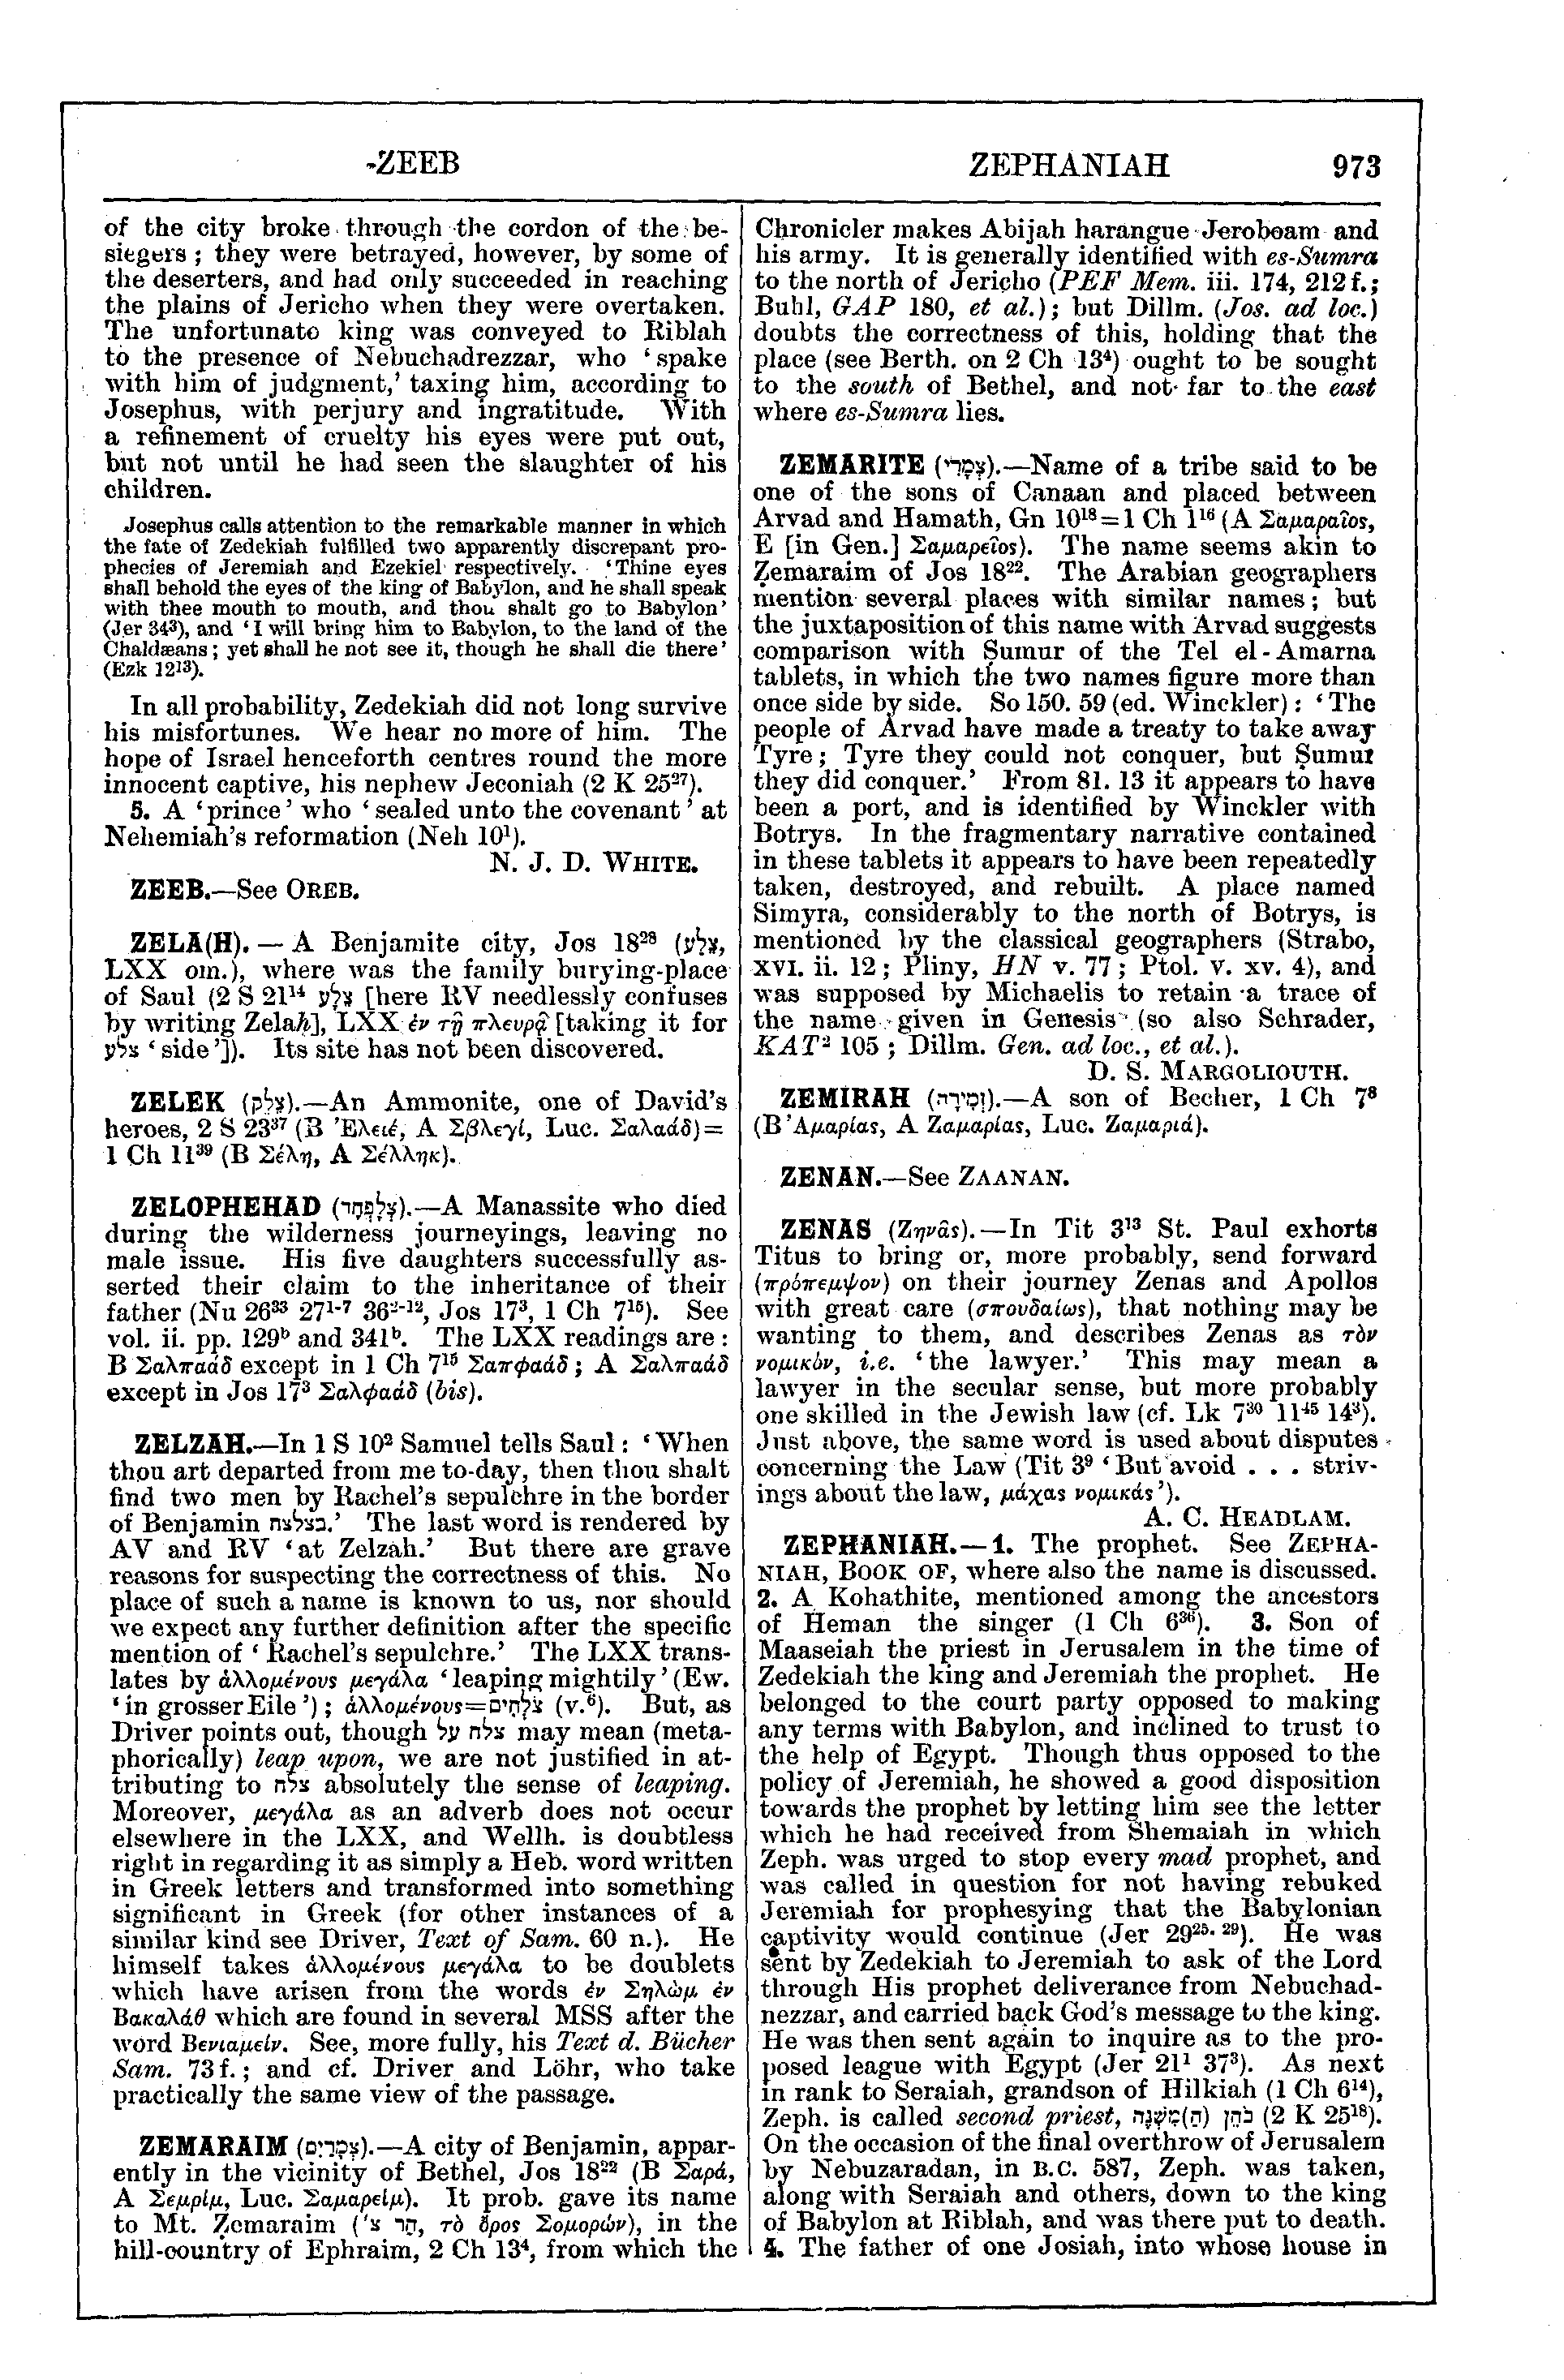 Image of page 973